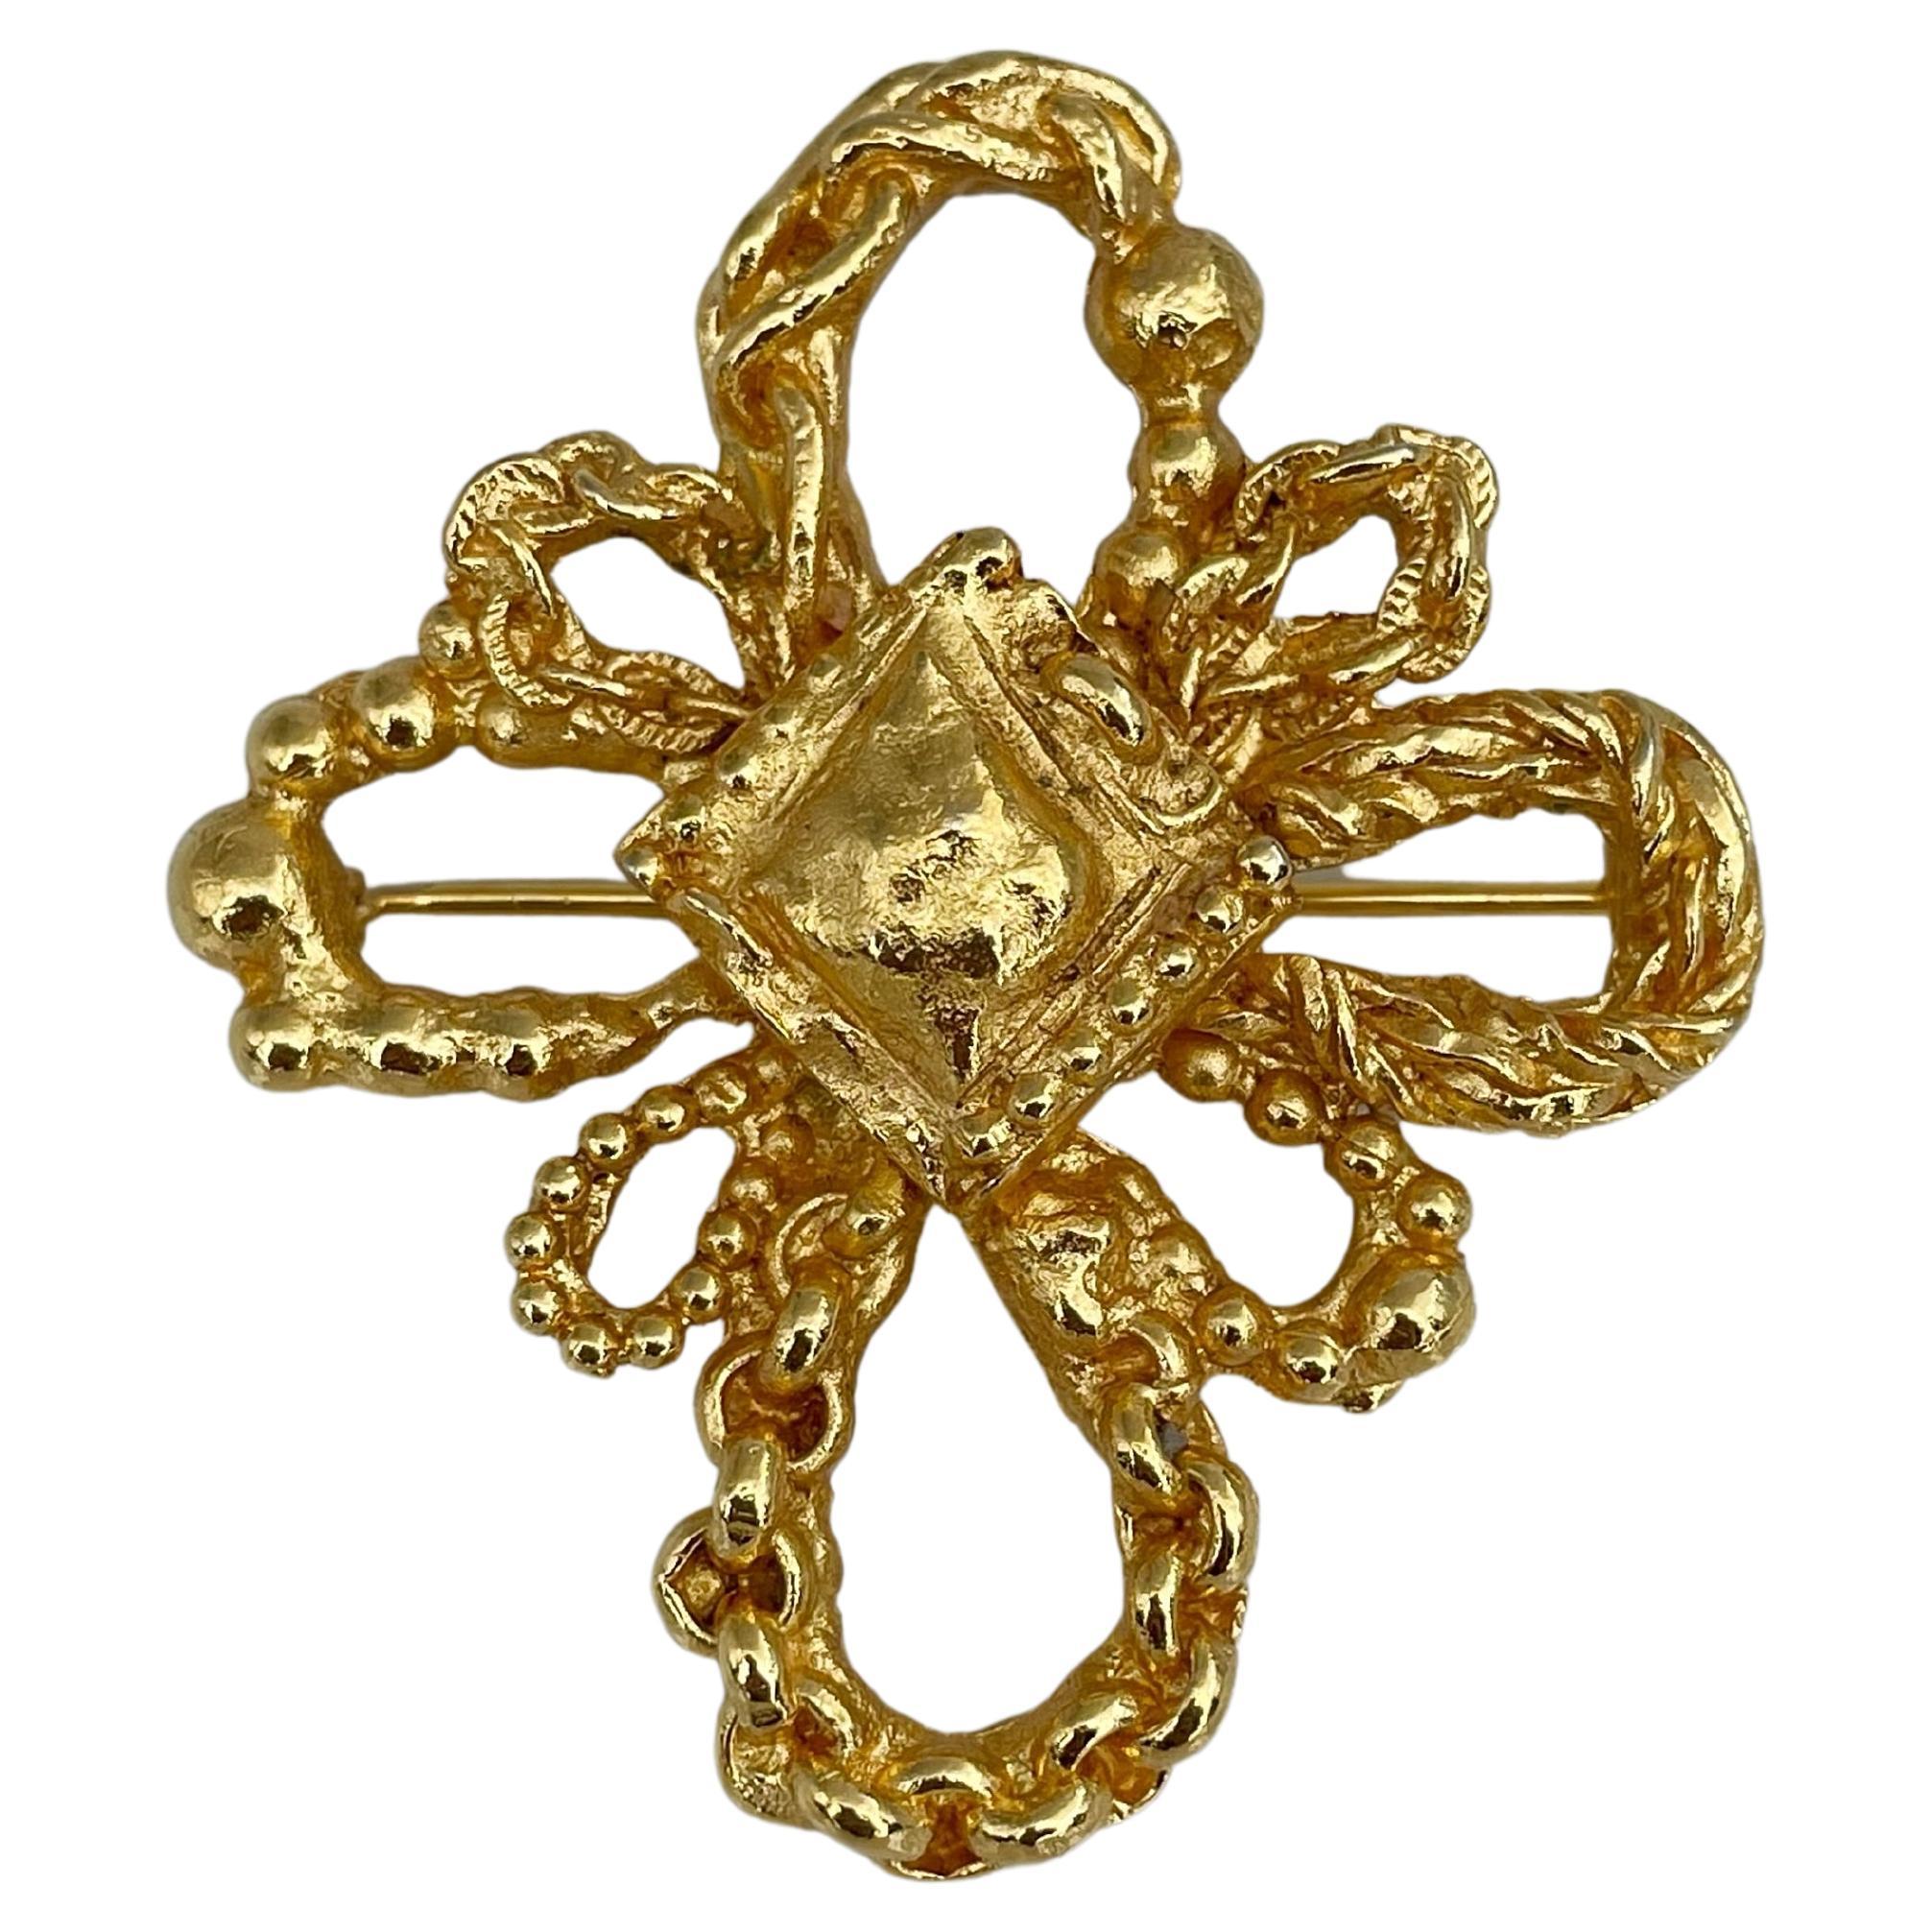 1980s Vintage Christian Lacroix Gold Tone Openwork Cross Pin Brooch